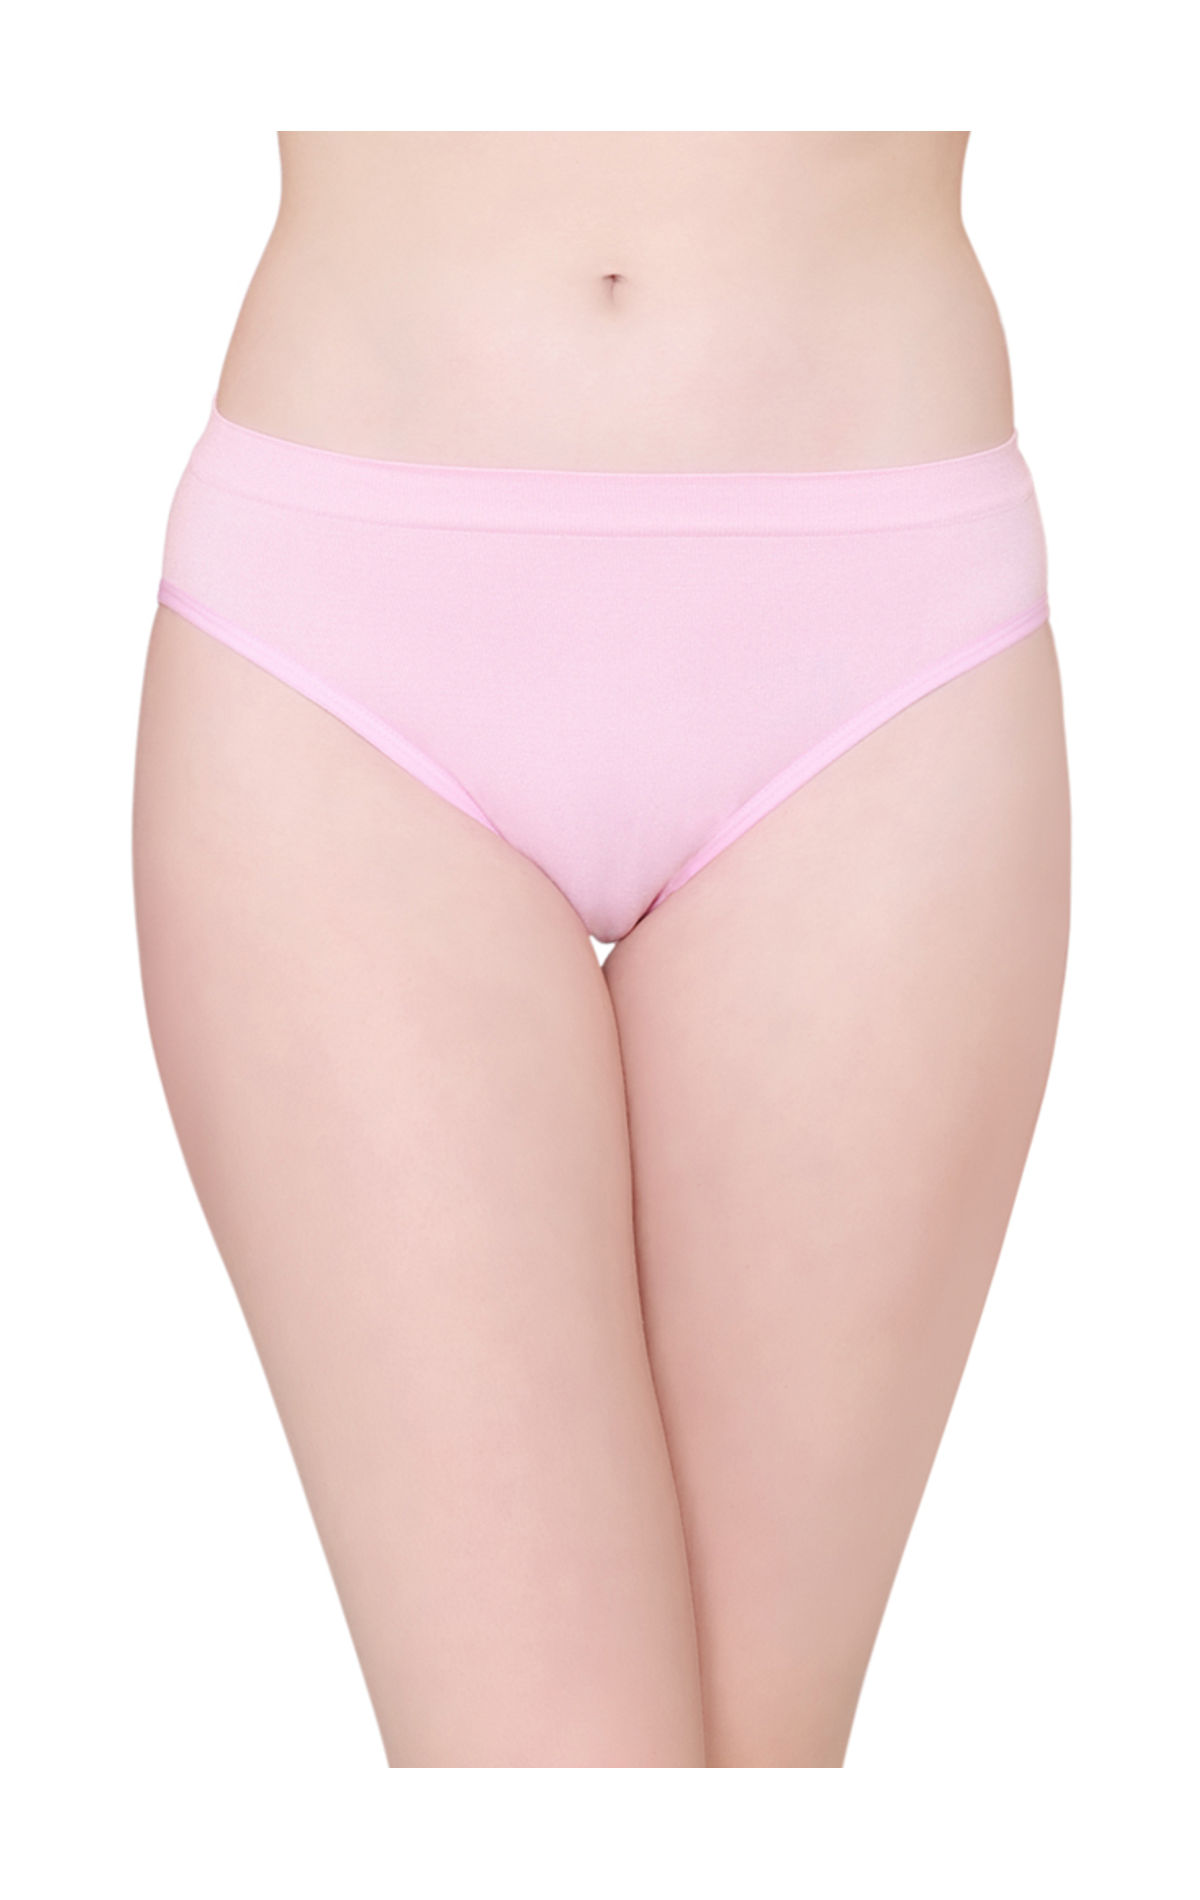 Pack of 2 Seamless Briefs in Microfibre for Maternity - pink light solid,  Maternity